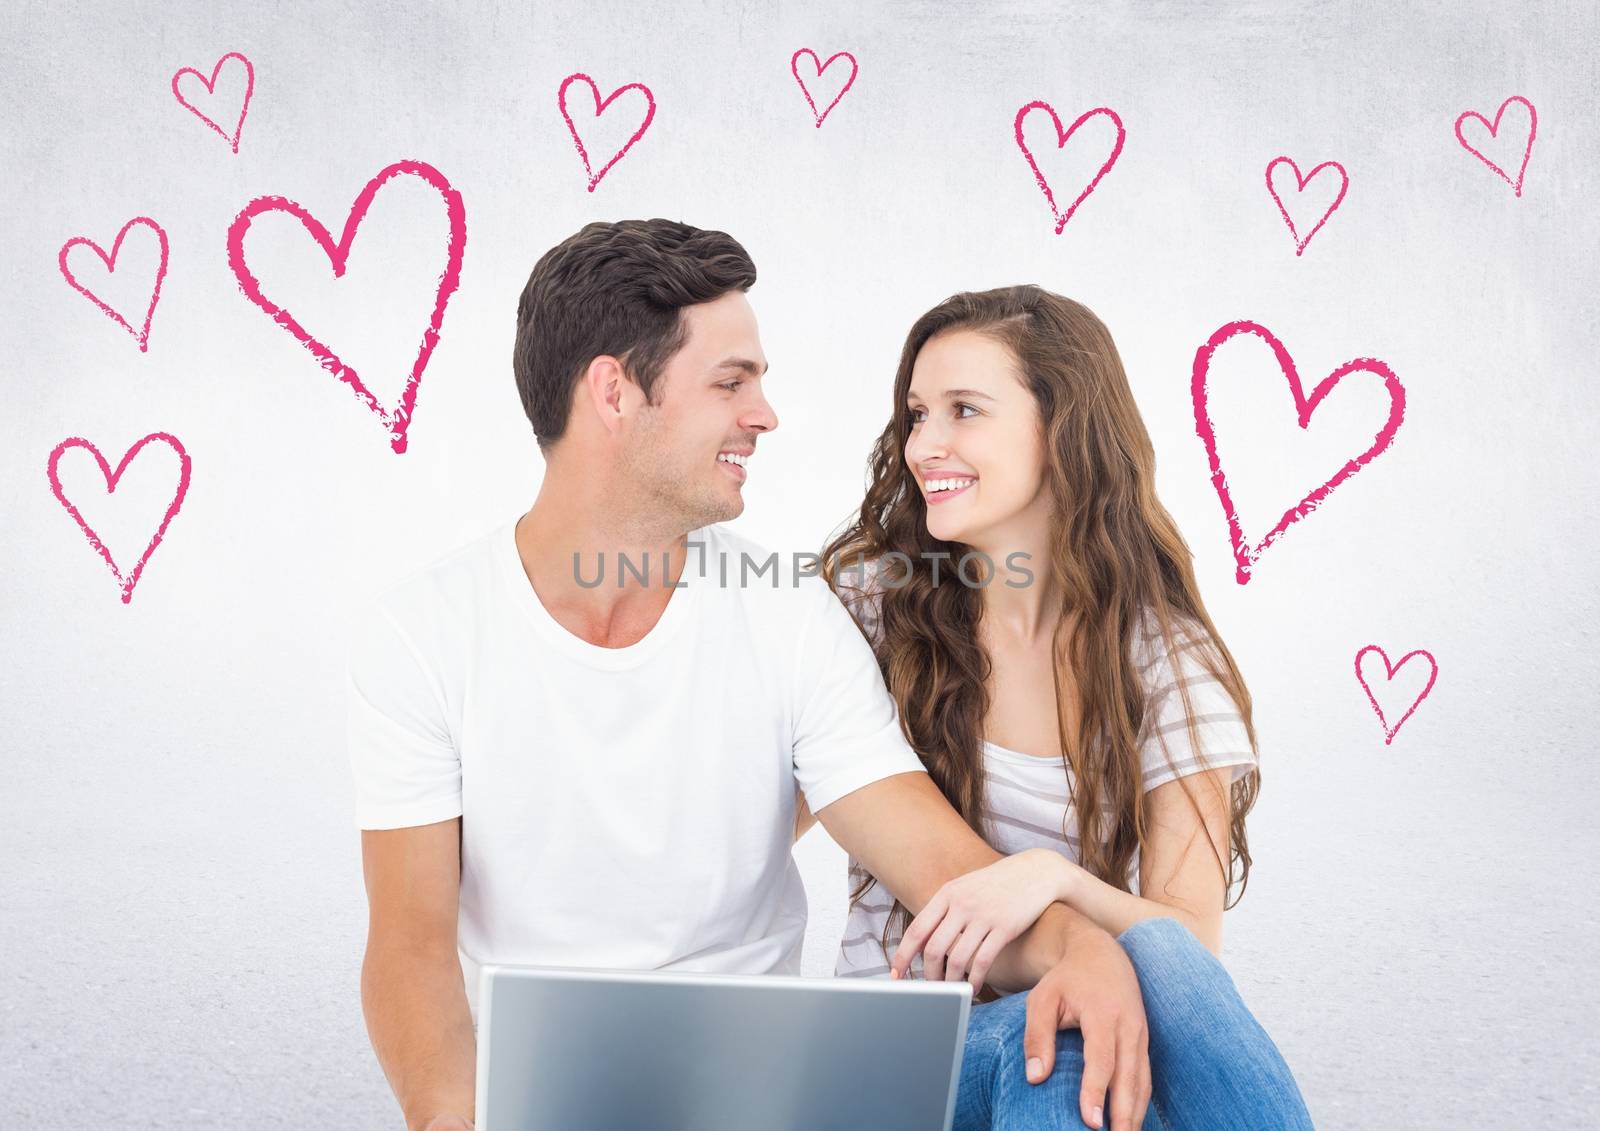 Romantic couple sitting against white background with pink heart shapes